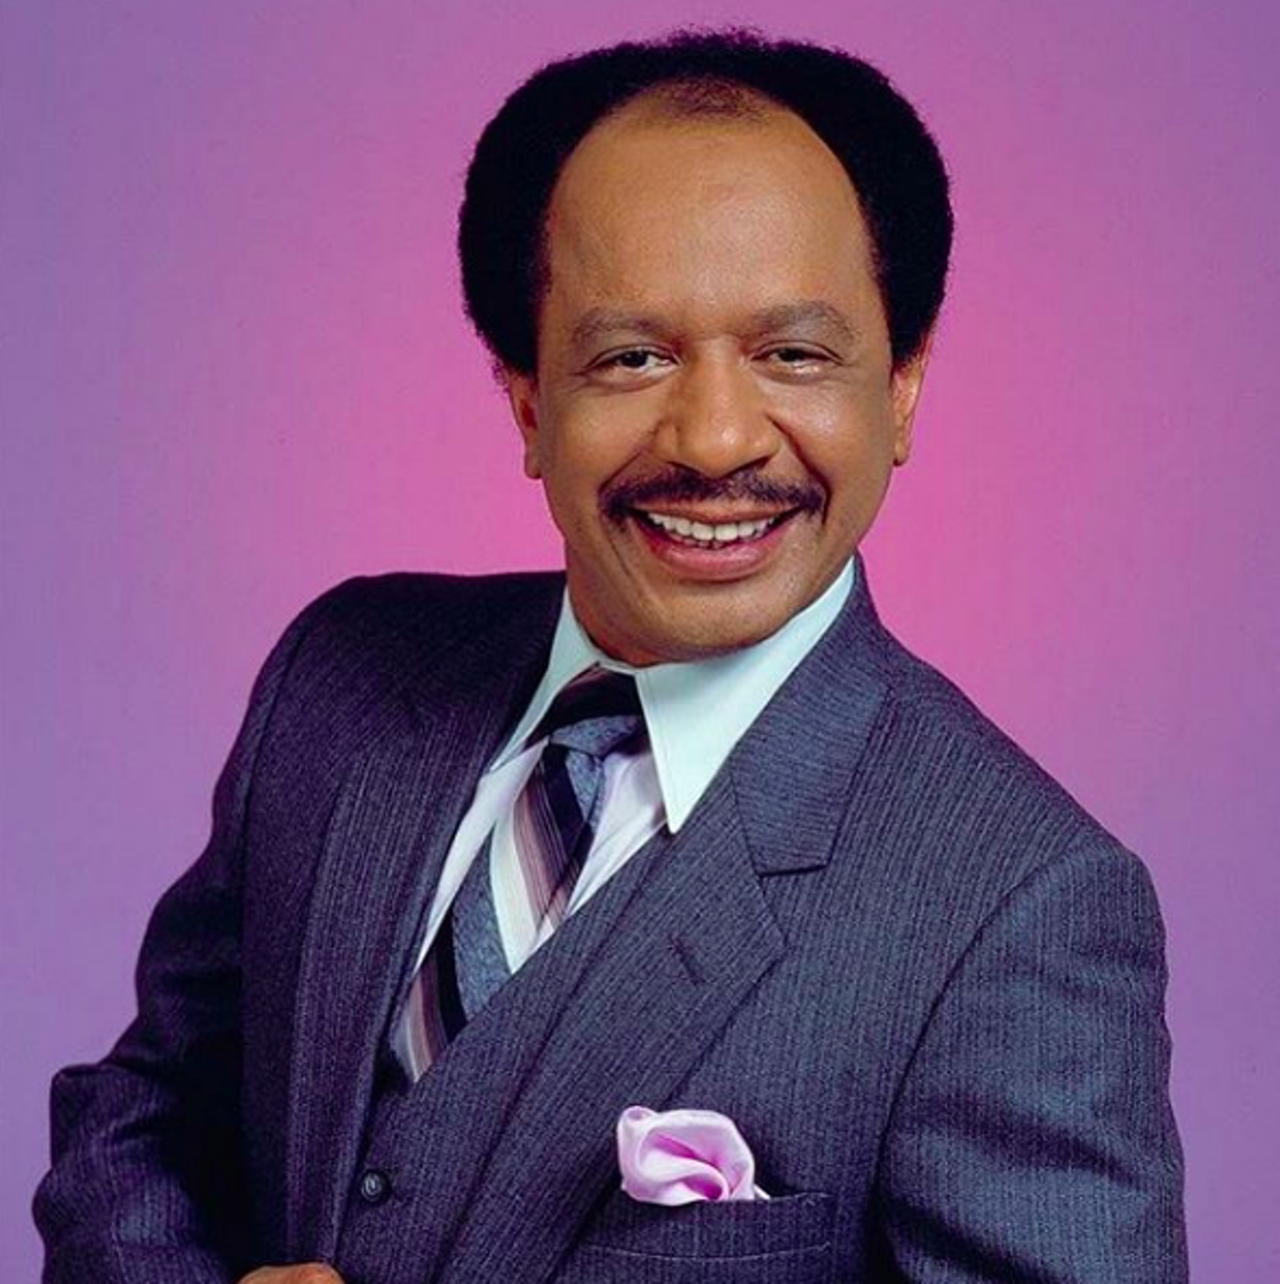 Sherman Alexander Hemsley
Hello, childhood – if you’re a retro TV All in the Family or The Jeffersons fan. Sherman Alexander Hemsley was born and raised in South Philadelphia, and is best known for his role as George Jefferson in All in the Family, for which he and his stage family were supporting roles. Soon, the Jeffersons got their own spinoff by the name of The Jeffersons. He was inducted into the Television Academy Hall of Fame in 2012. His resting place is in his adopted hometown of El Paso in the Fort Bliss National Cemetery. 
Photo via Instagram / strange_wang